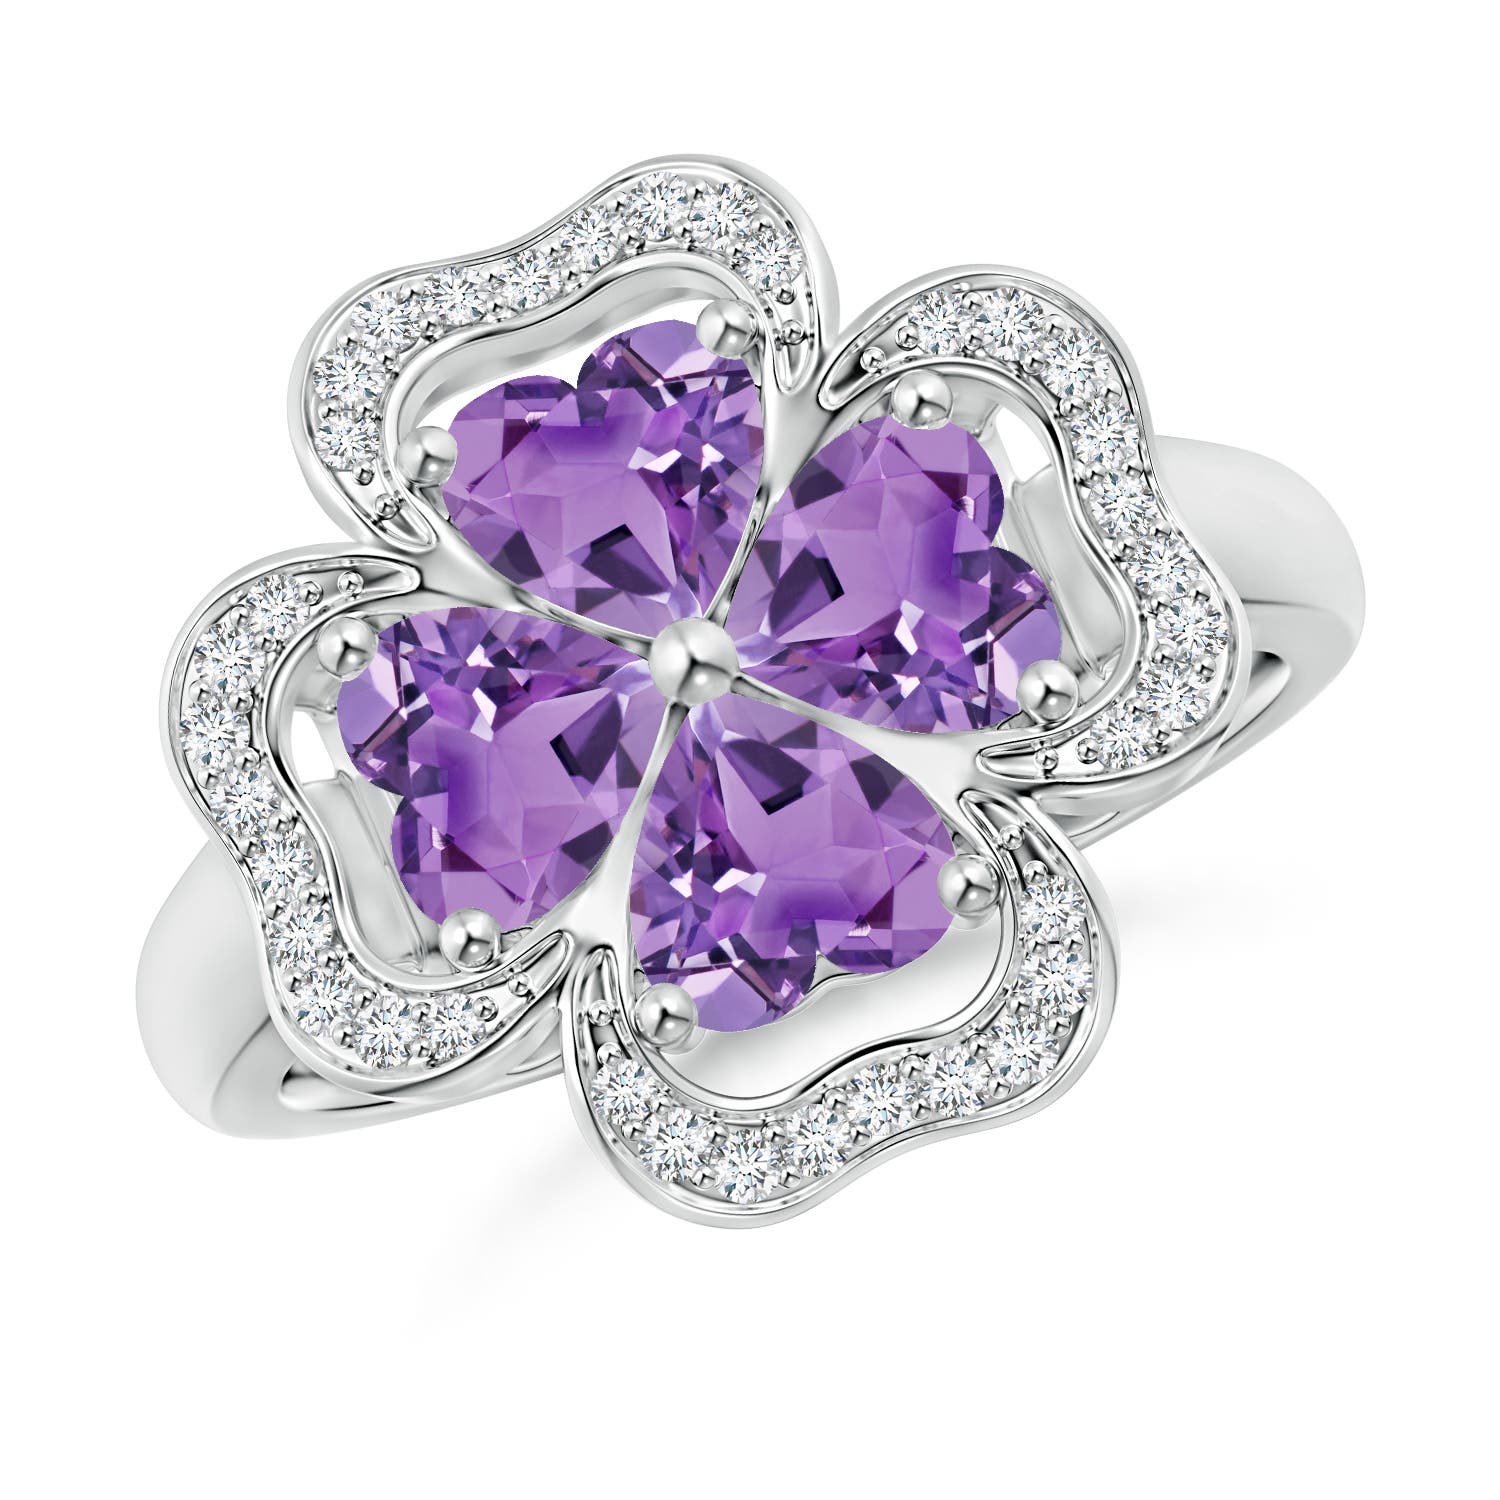 A - Amethyst / 1.57 CT / 14 KT White Gold